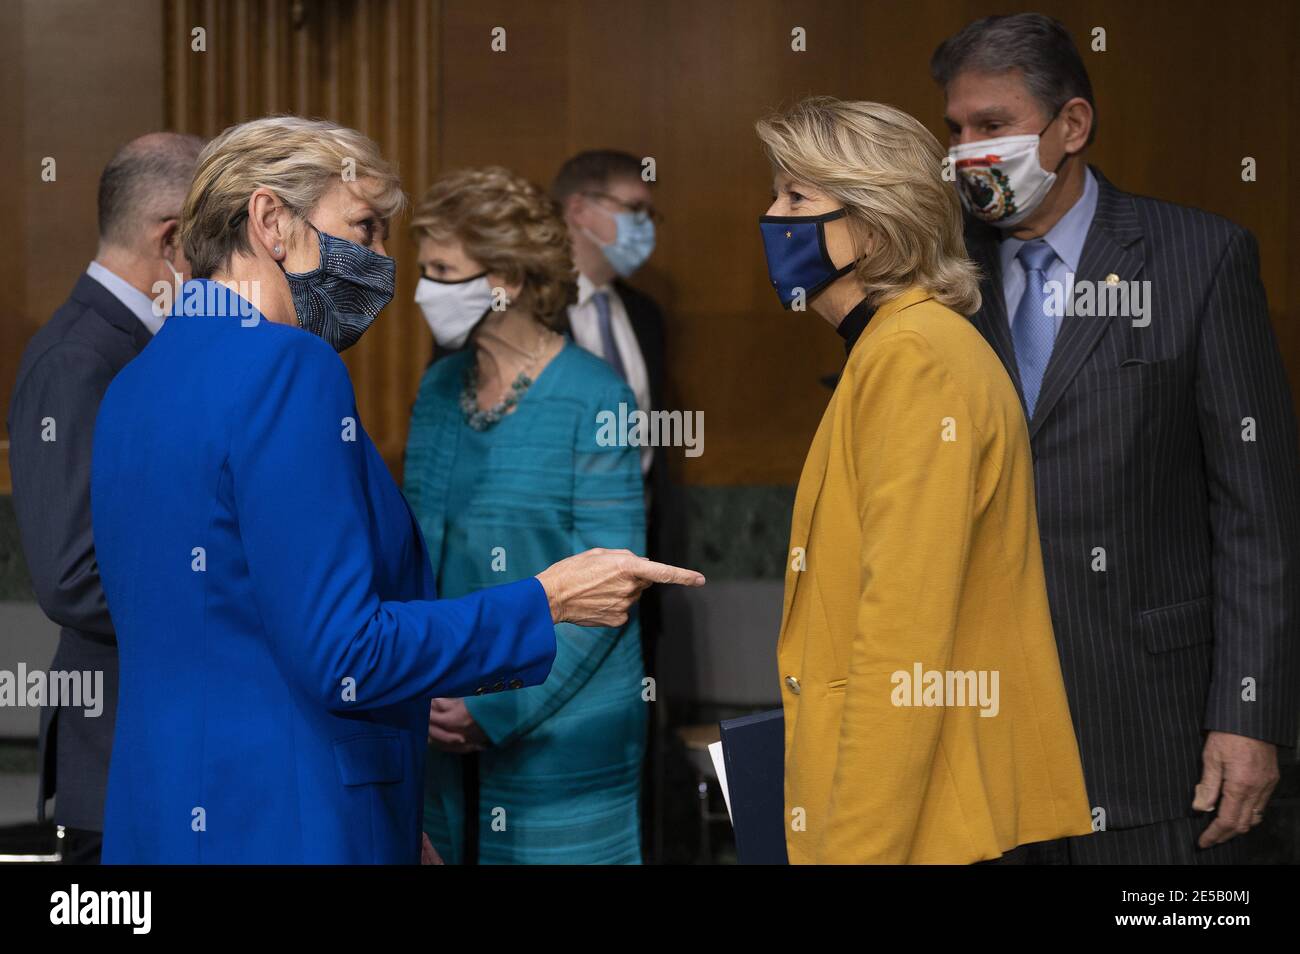 Washington, United States. 27th Jan, 2021. Chairwoman Lisa Murkowski (2nd R), R-Alaksa, and Ranking Member Joe Manchin (R), D-WV, speaks with Former Michigan Governor Jennifer Granholm ahead of a erhearing to examine h nomination of to be Secretary of Energy, on Capitol Hill in Washington, DC, on January 27, 2021. Photo by Jim Watson/UPI Credit: UPI/Alamy Live News Stock Photo